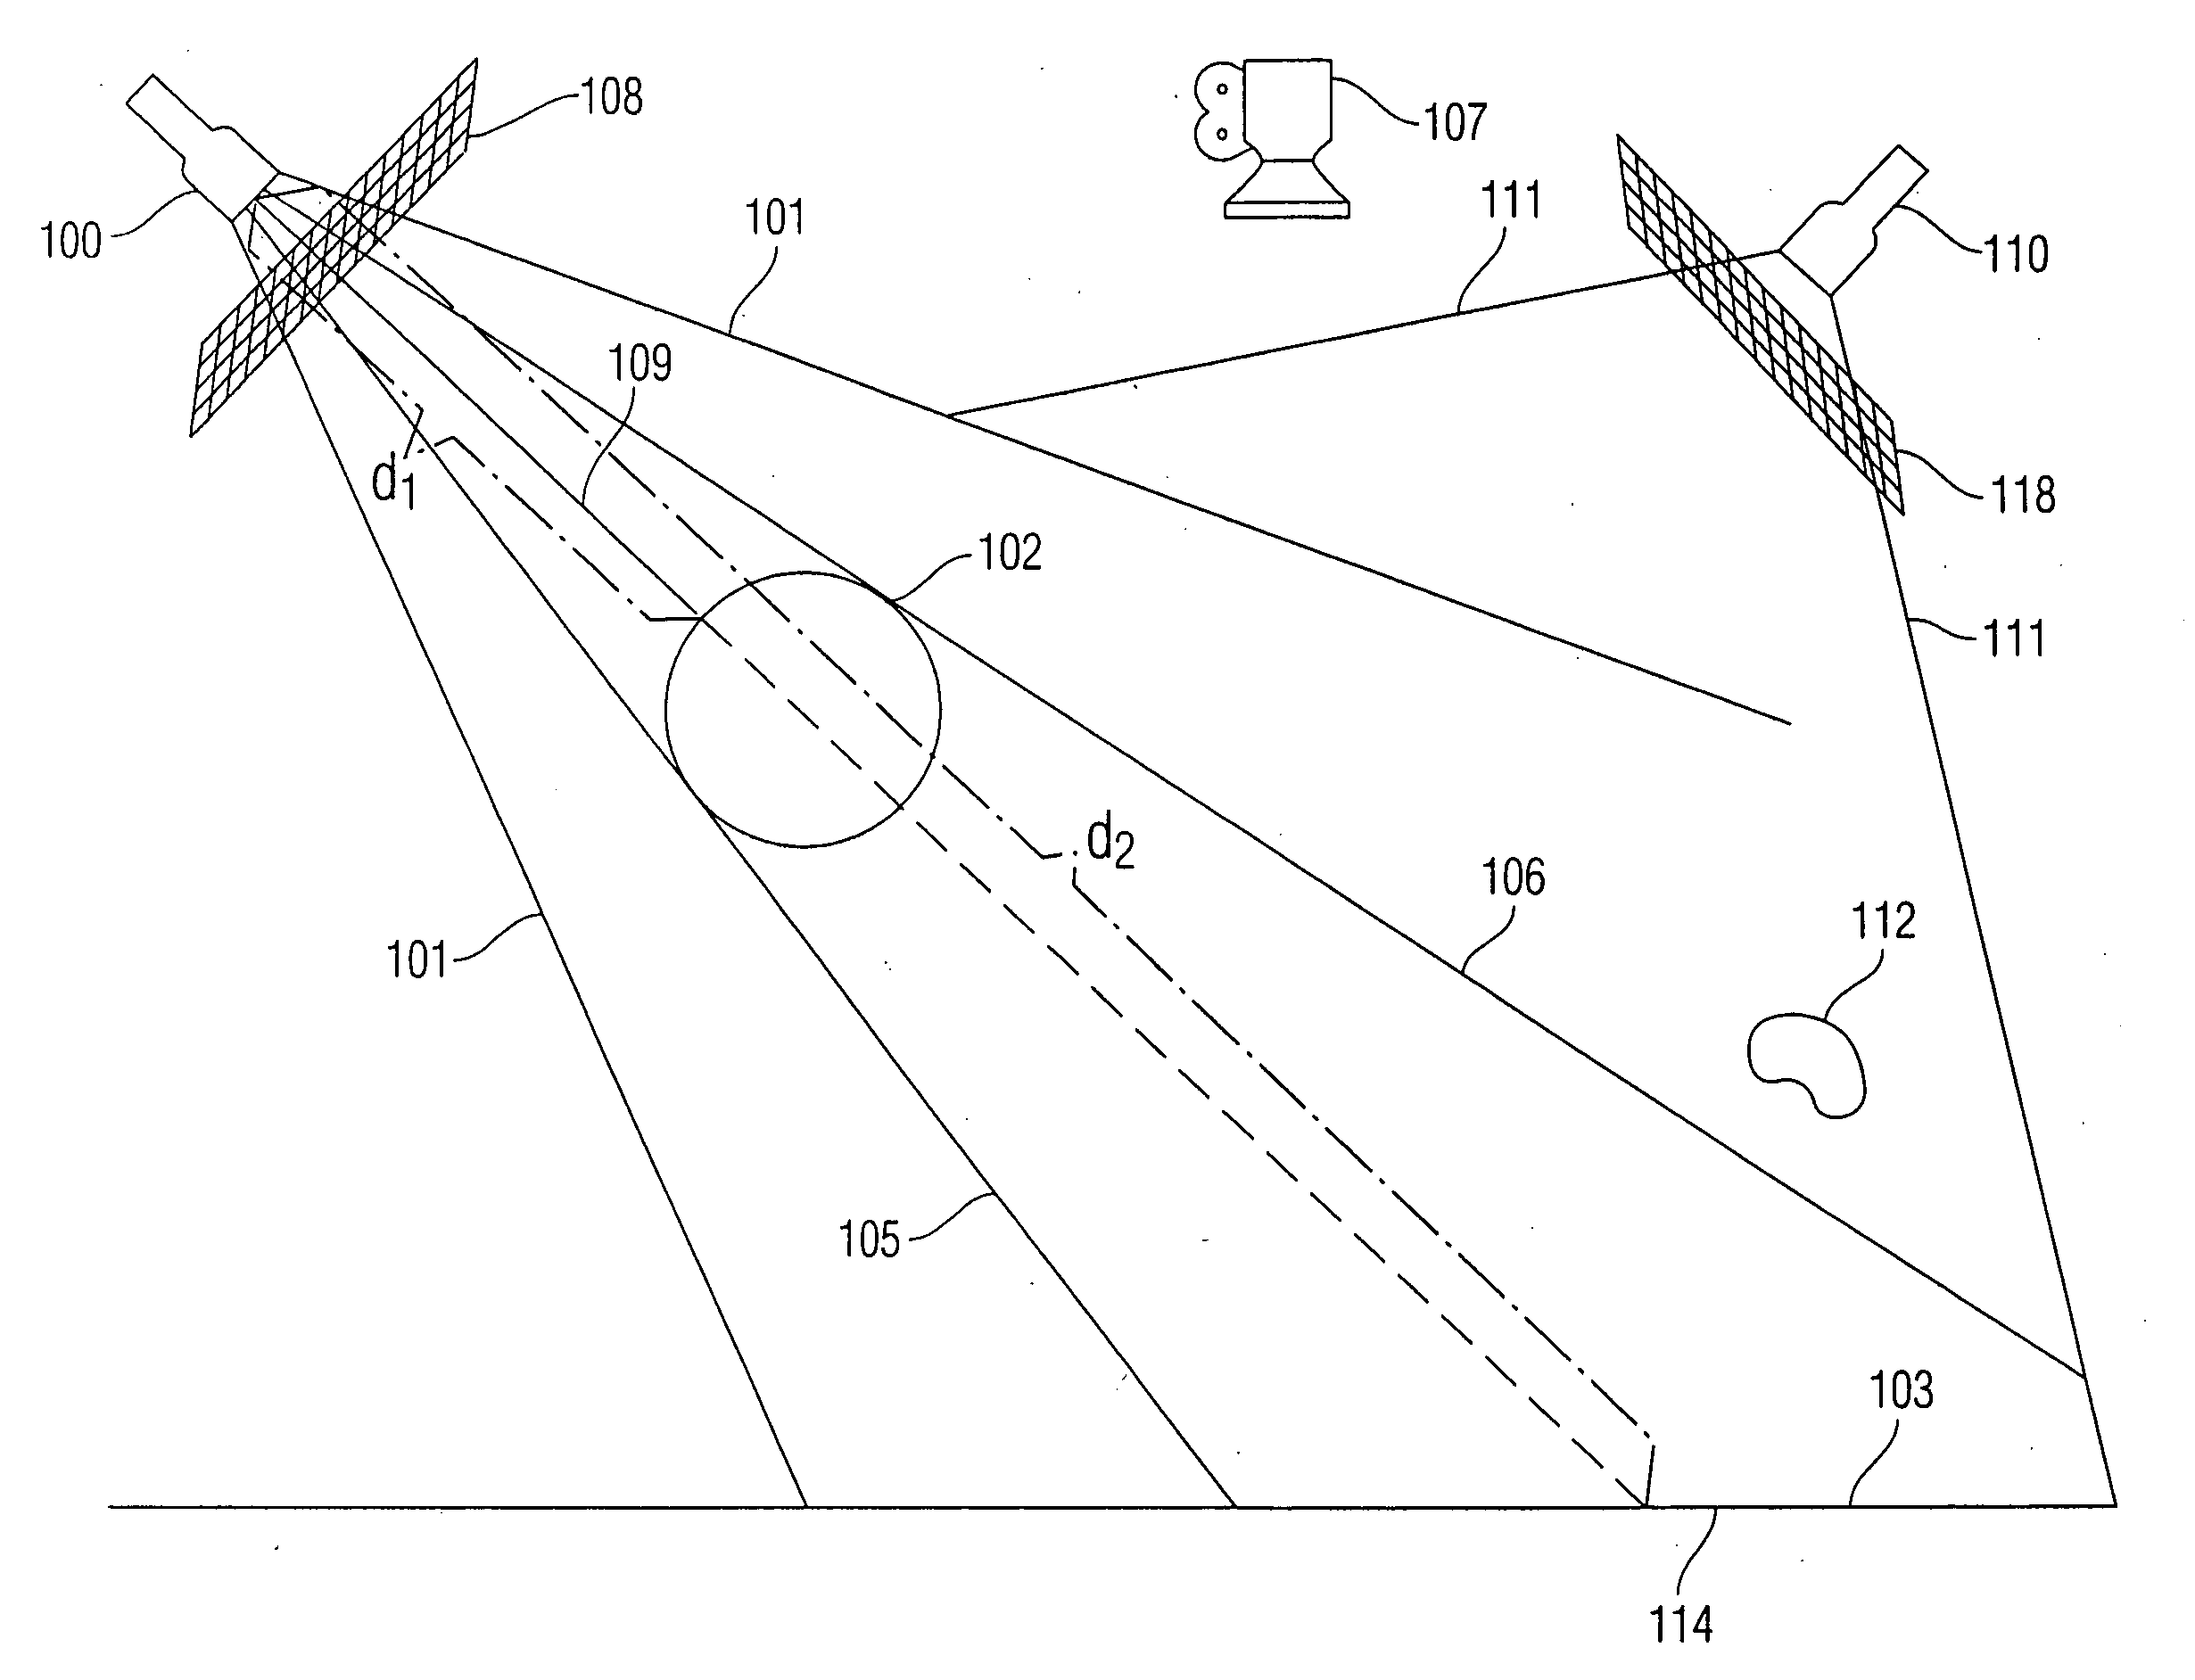 System and method for rendering computer graphics utilizing a shadow illuminator